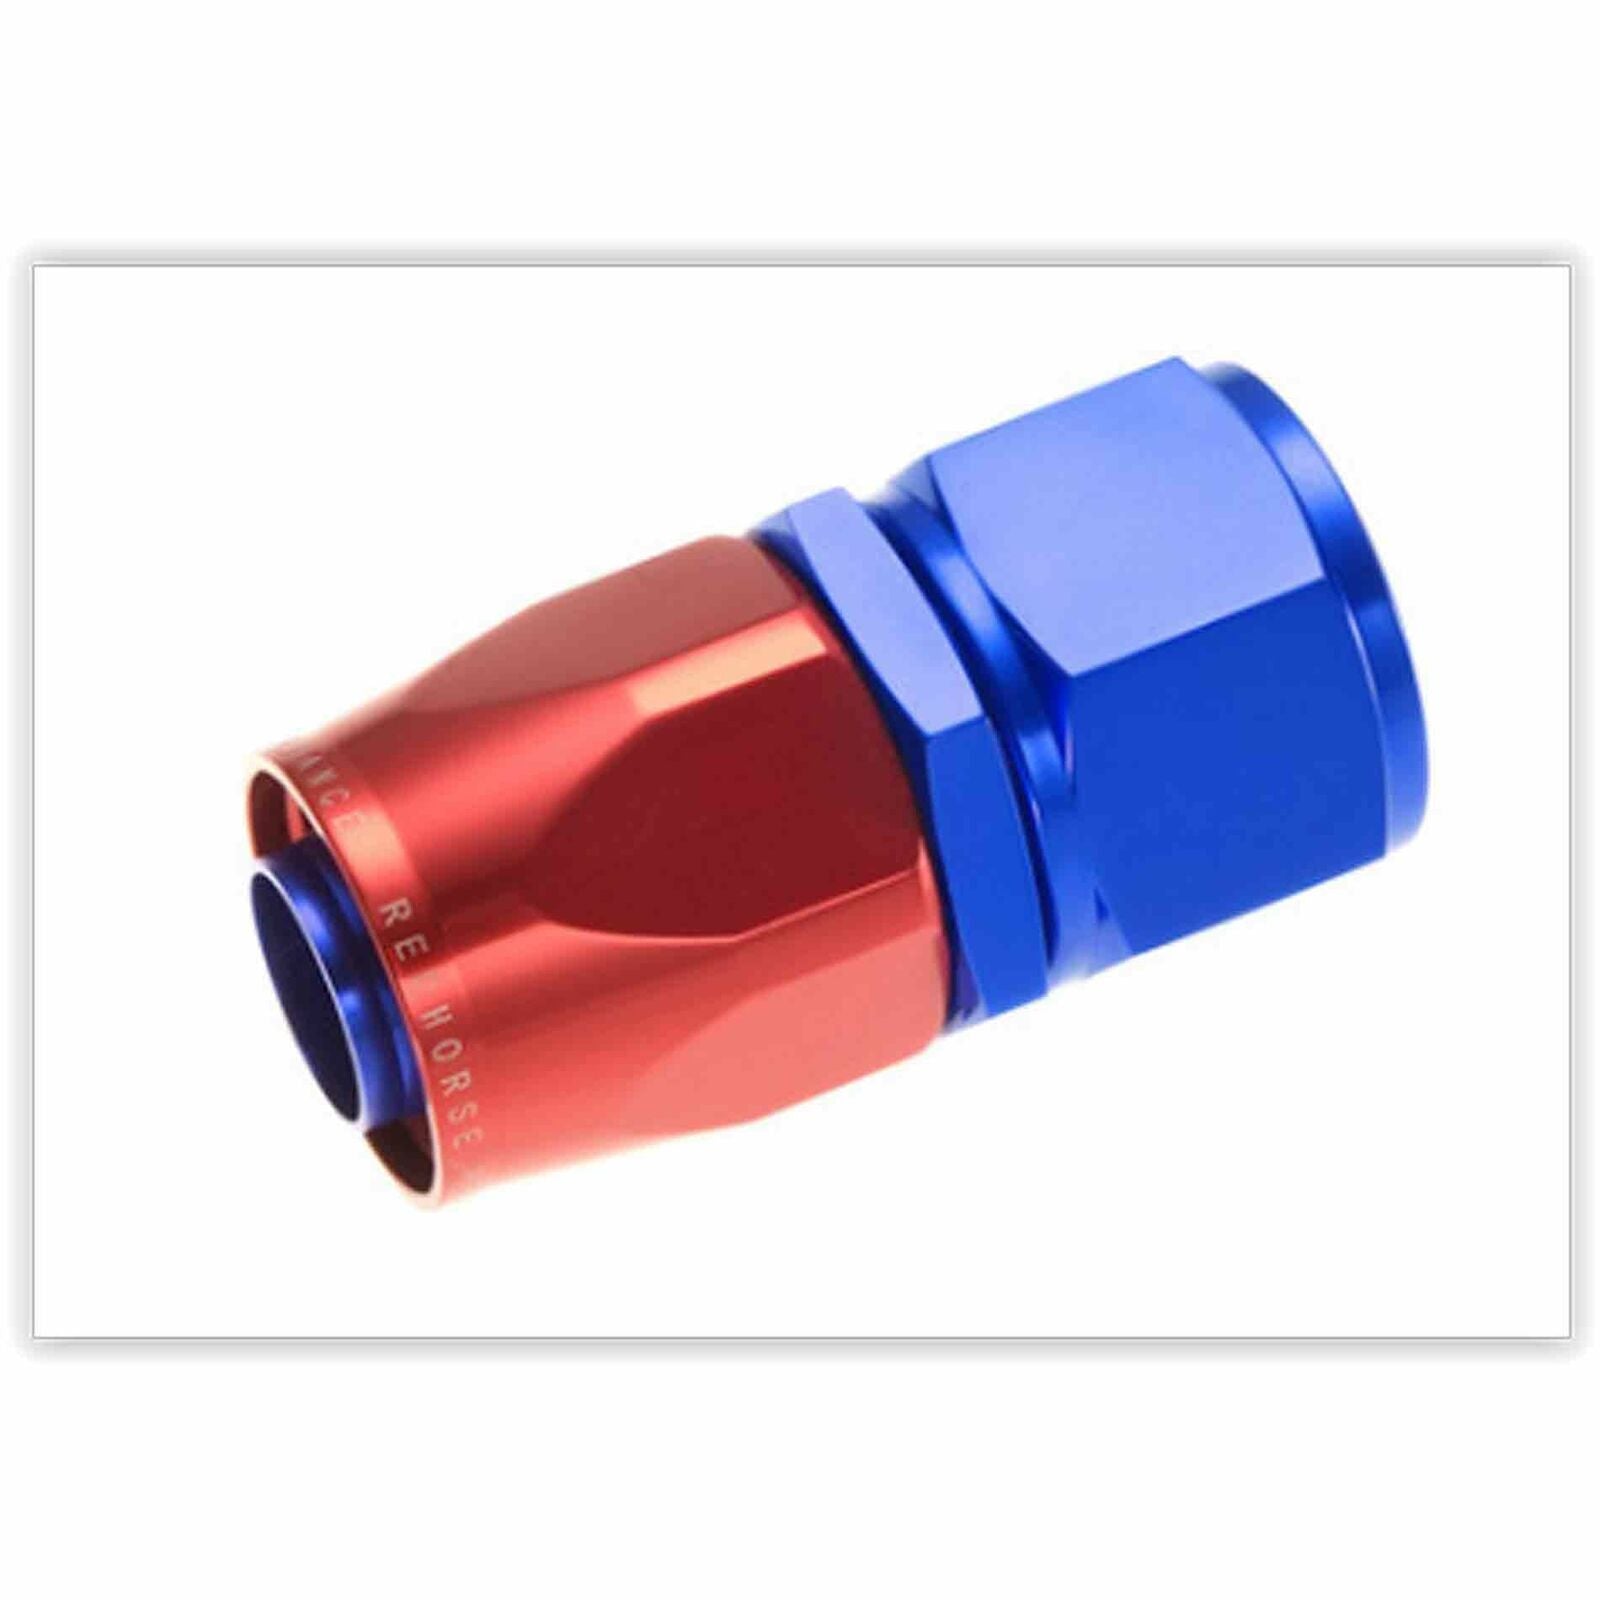 Redhorse Performance 1000-04-1 -04 straight Female Aluminum Hose End - Red Blue